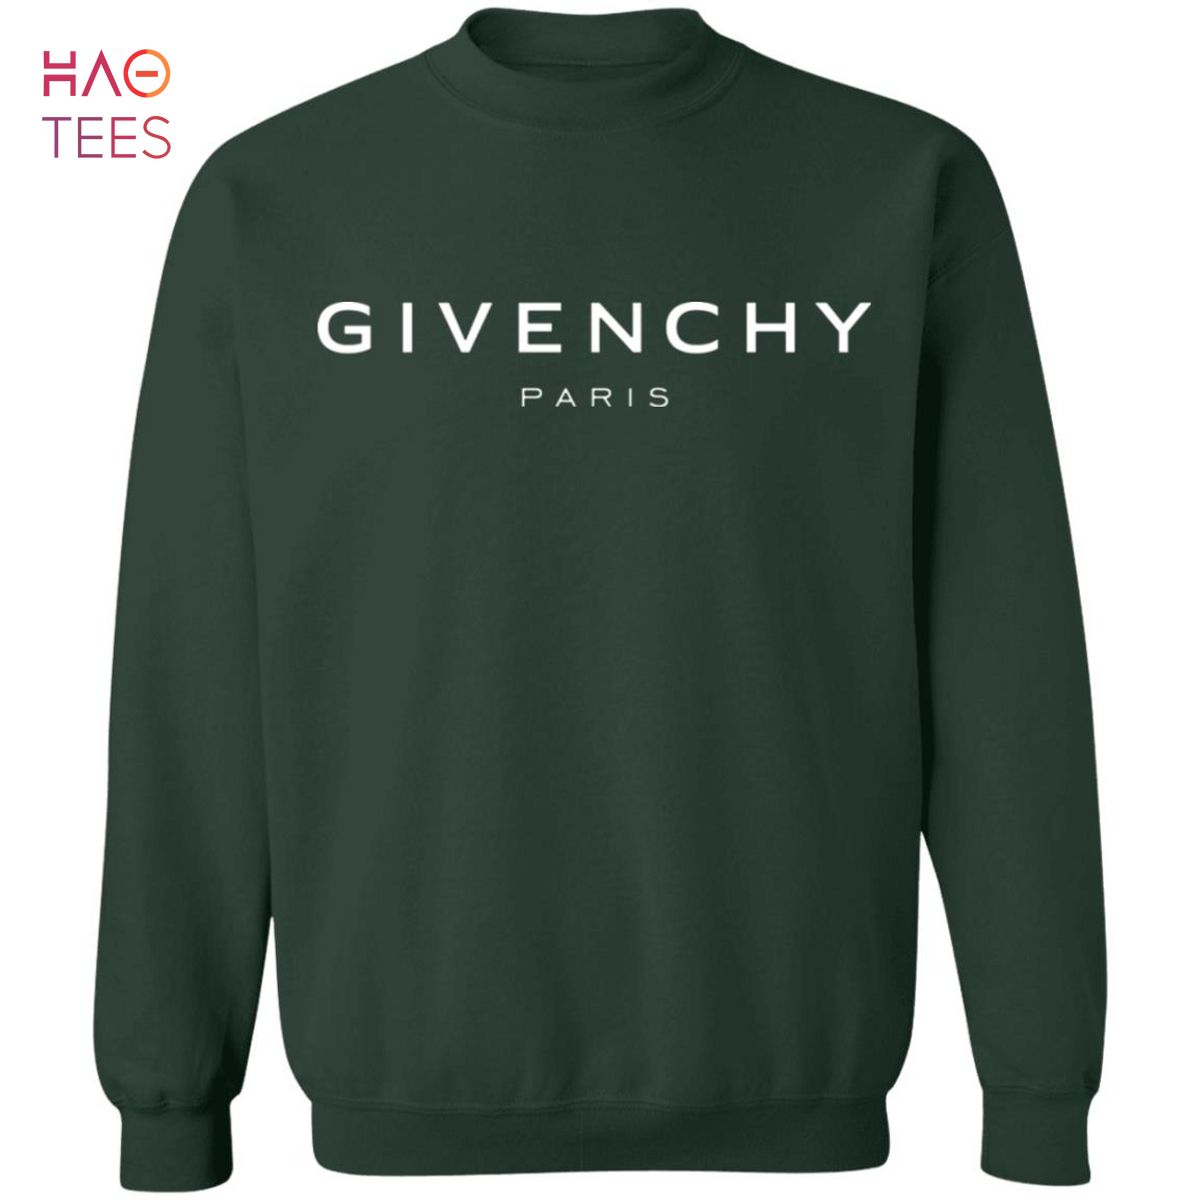 https://images.haotees.com/wp-content/uploads/2022/07/31130238/givenchy-sweater-5-DQluv.jpg